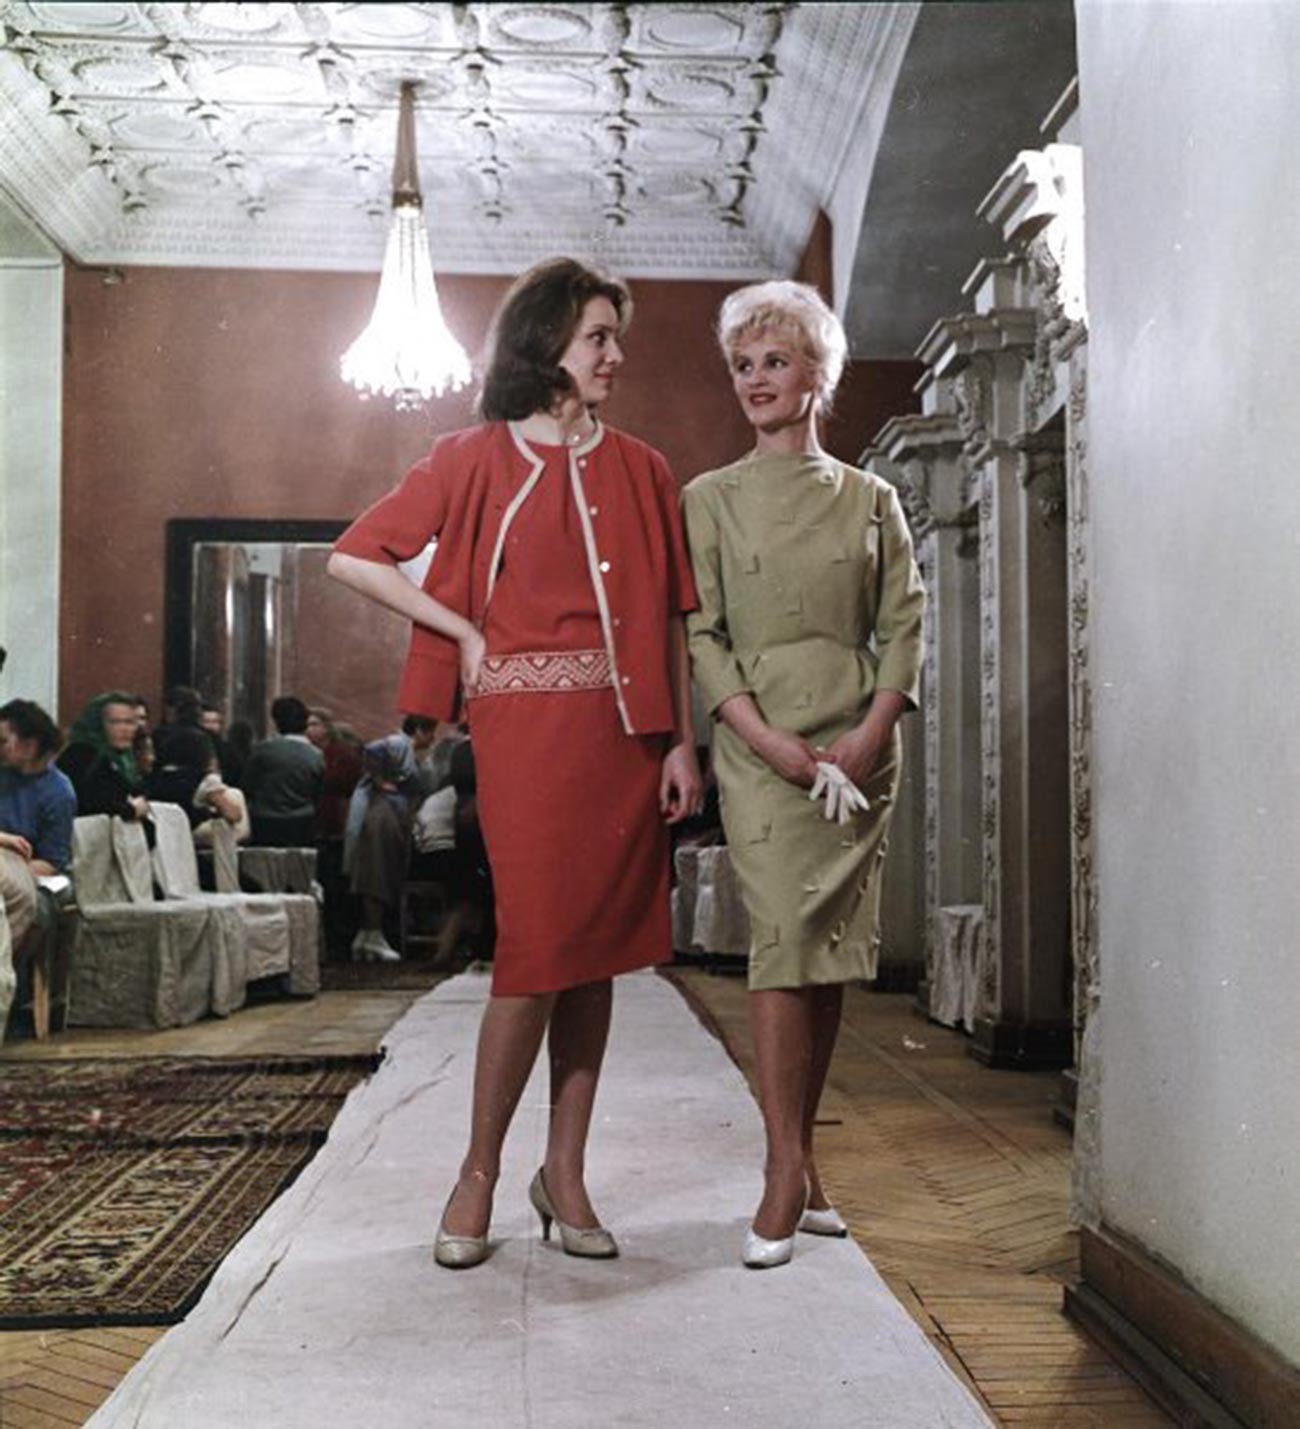 Showing a women's clothing collection, 1955-1963.